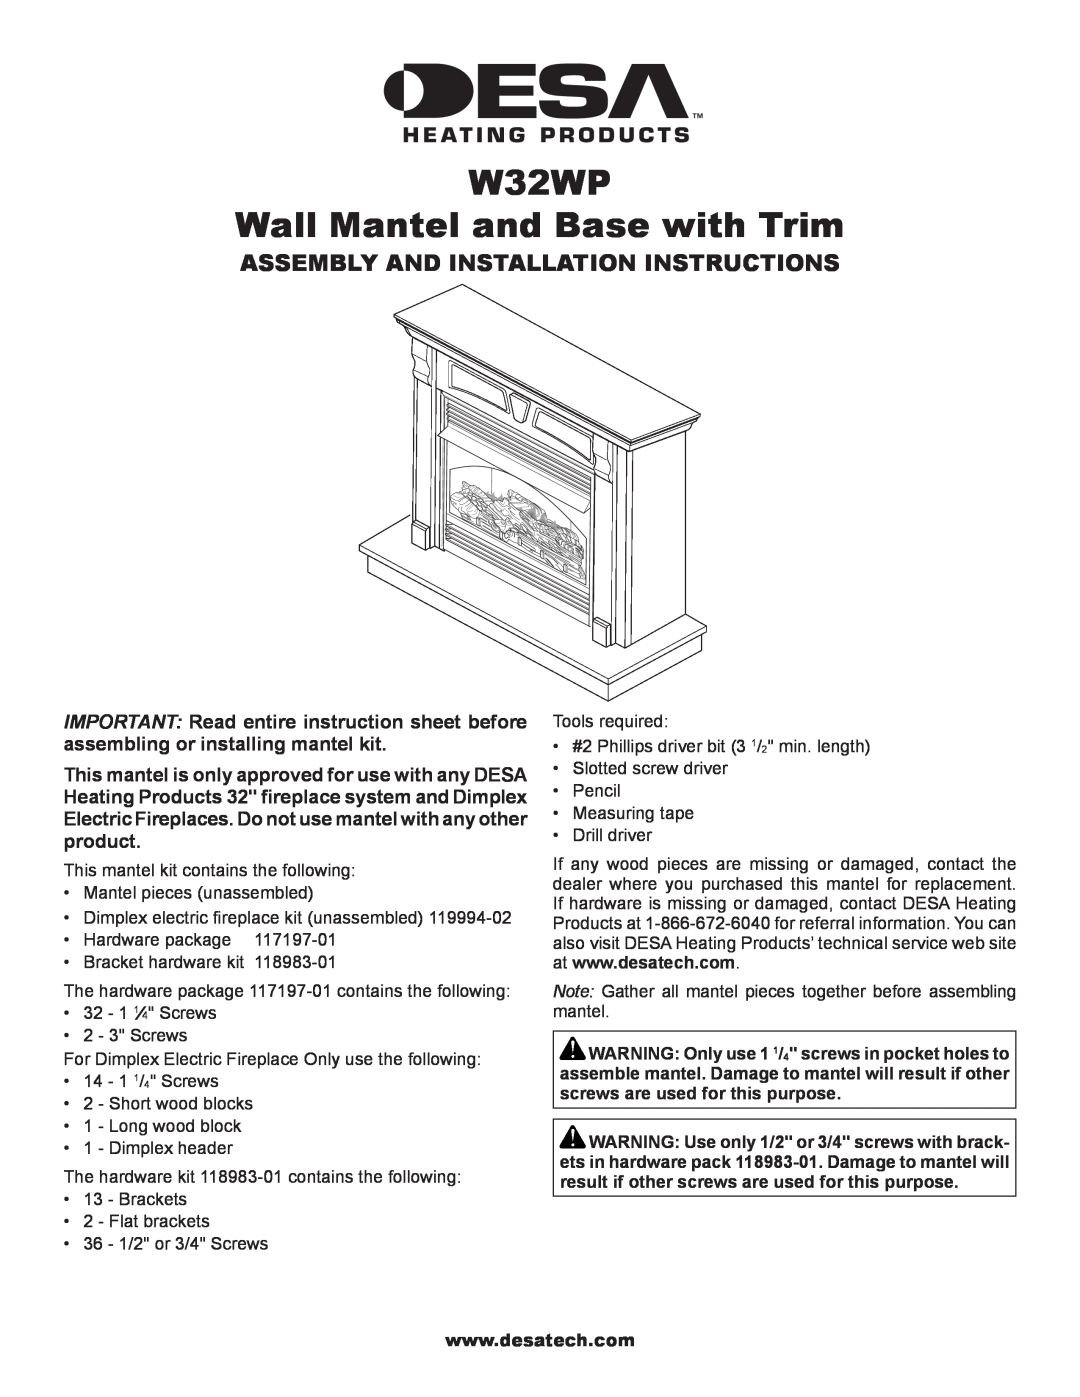 Desa installation instructions W32WP Wall Mantel and Base with Trim, Assembly And Installation Instructions 